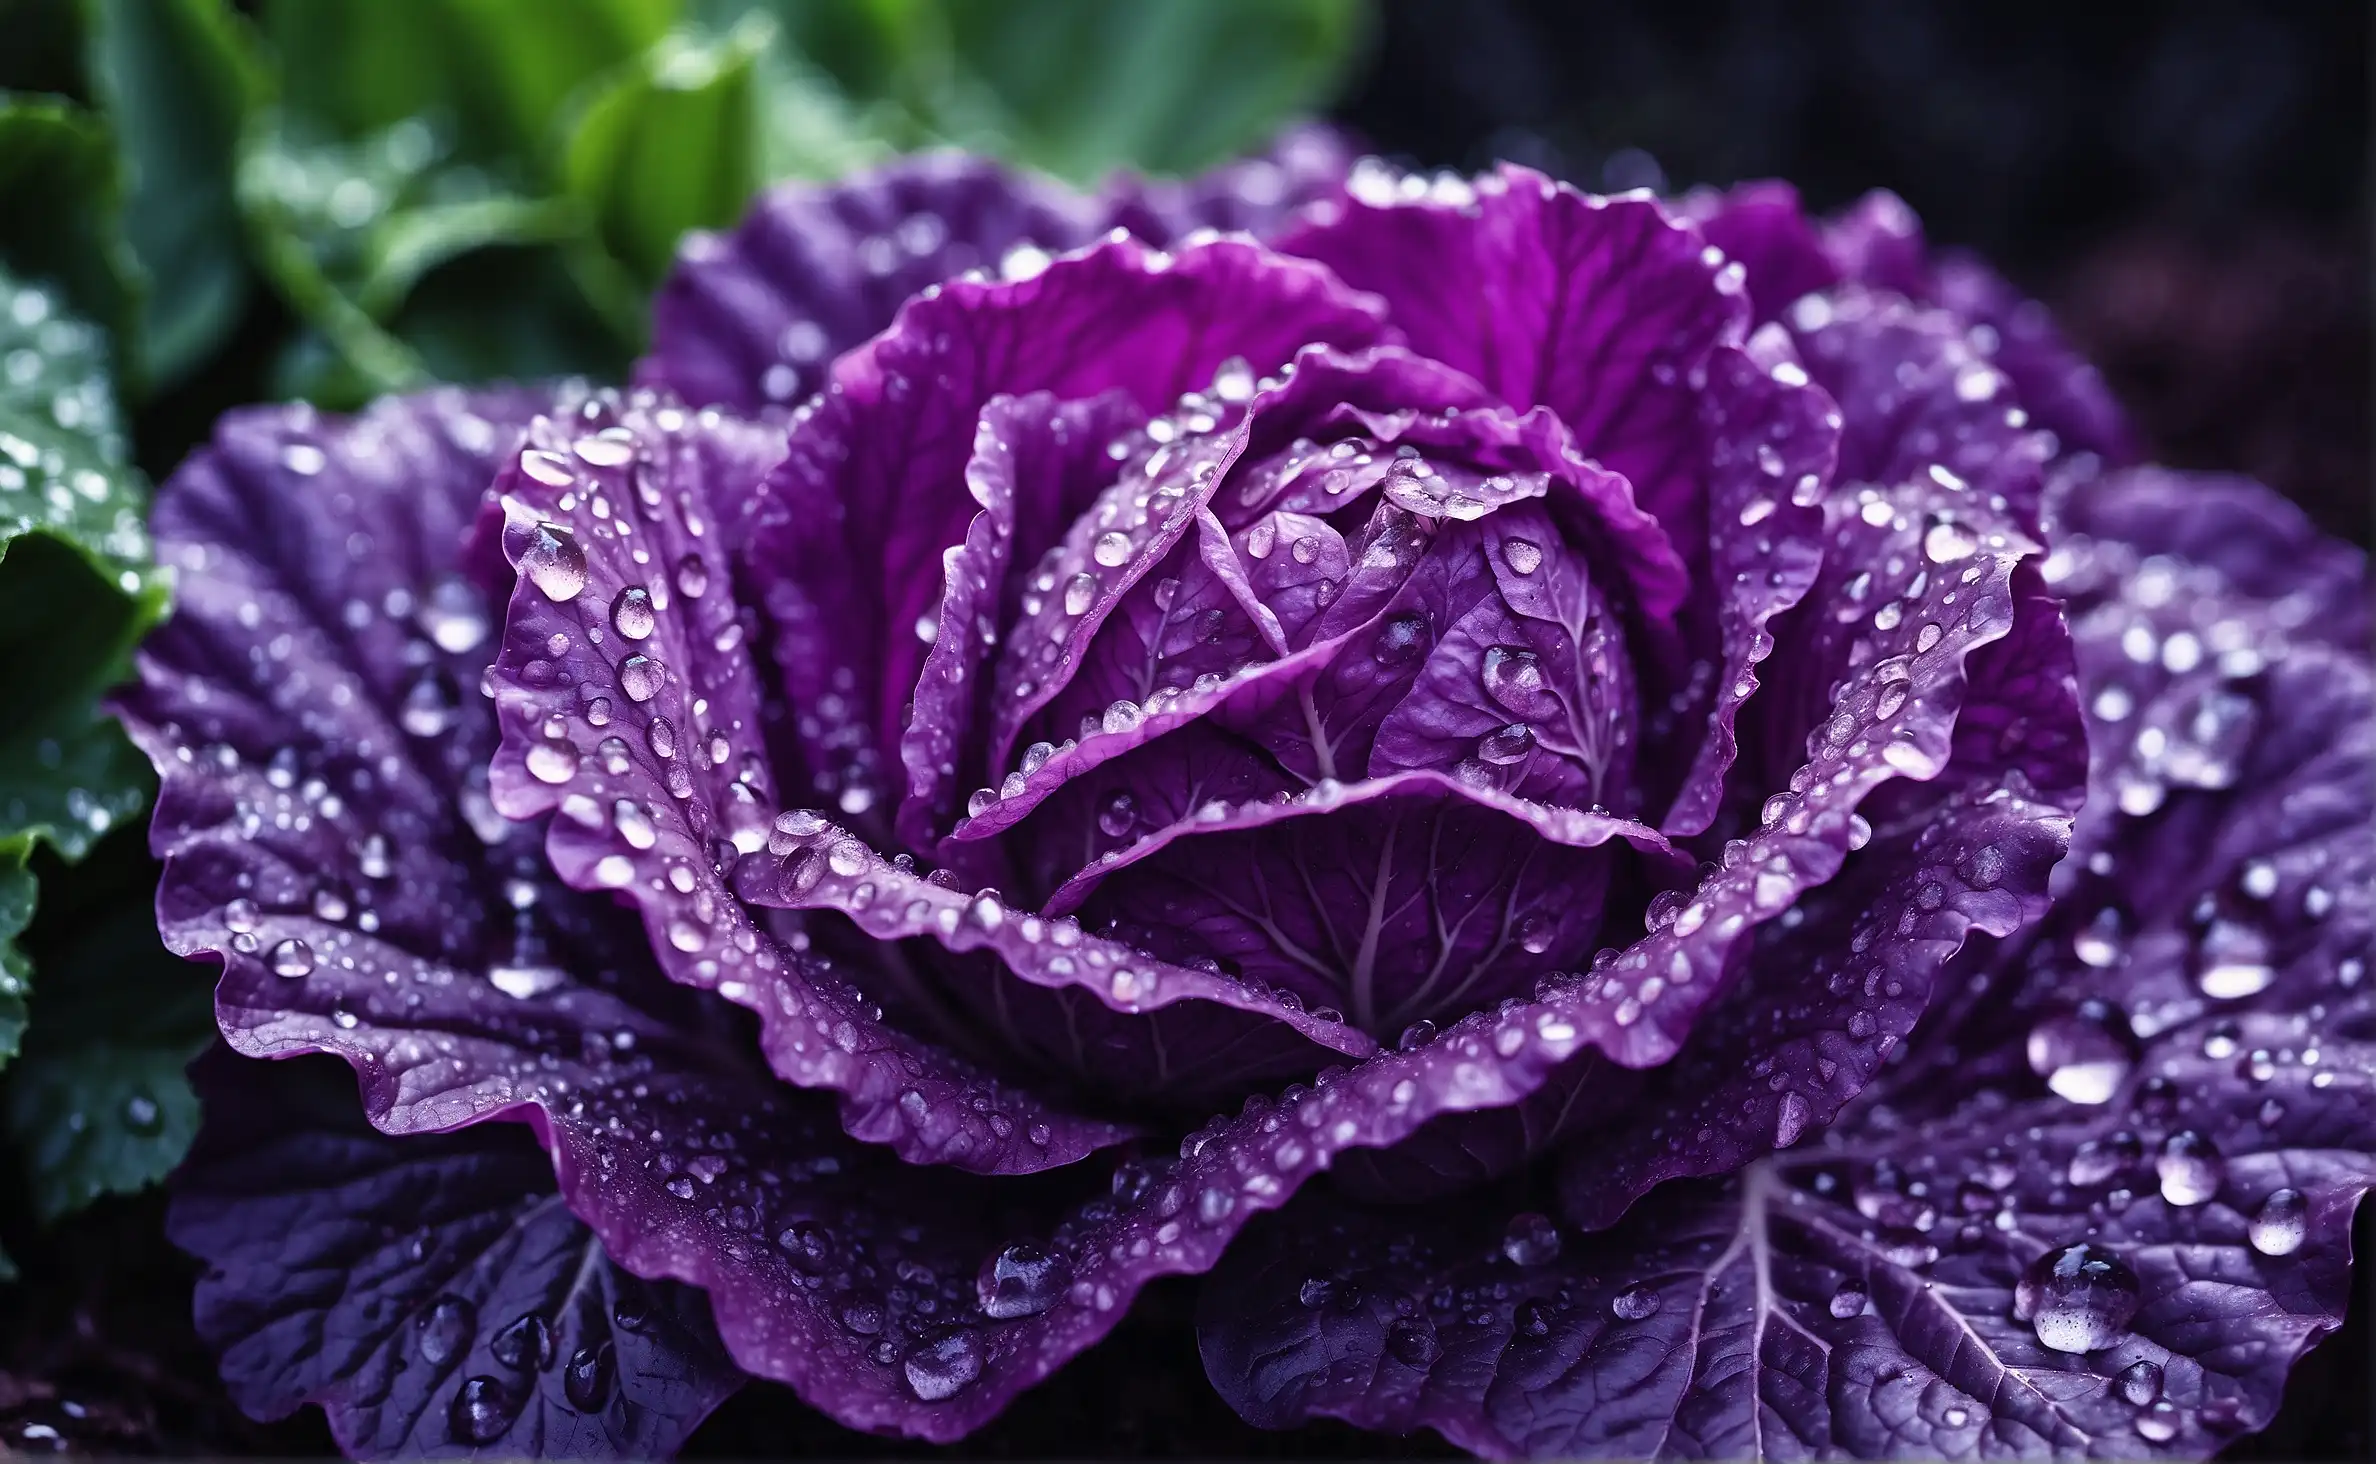 How to Tell If Purple Cabbage is Bad